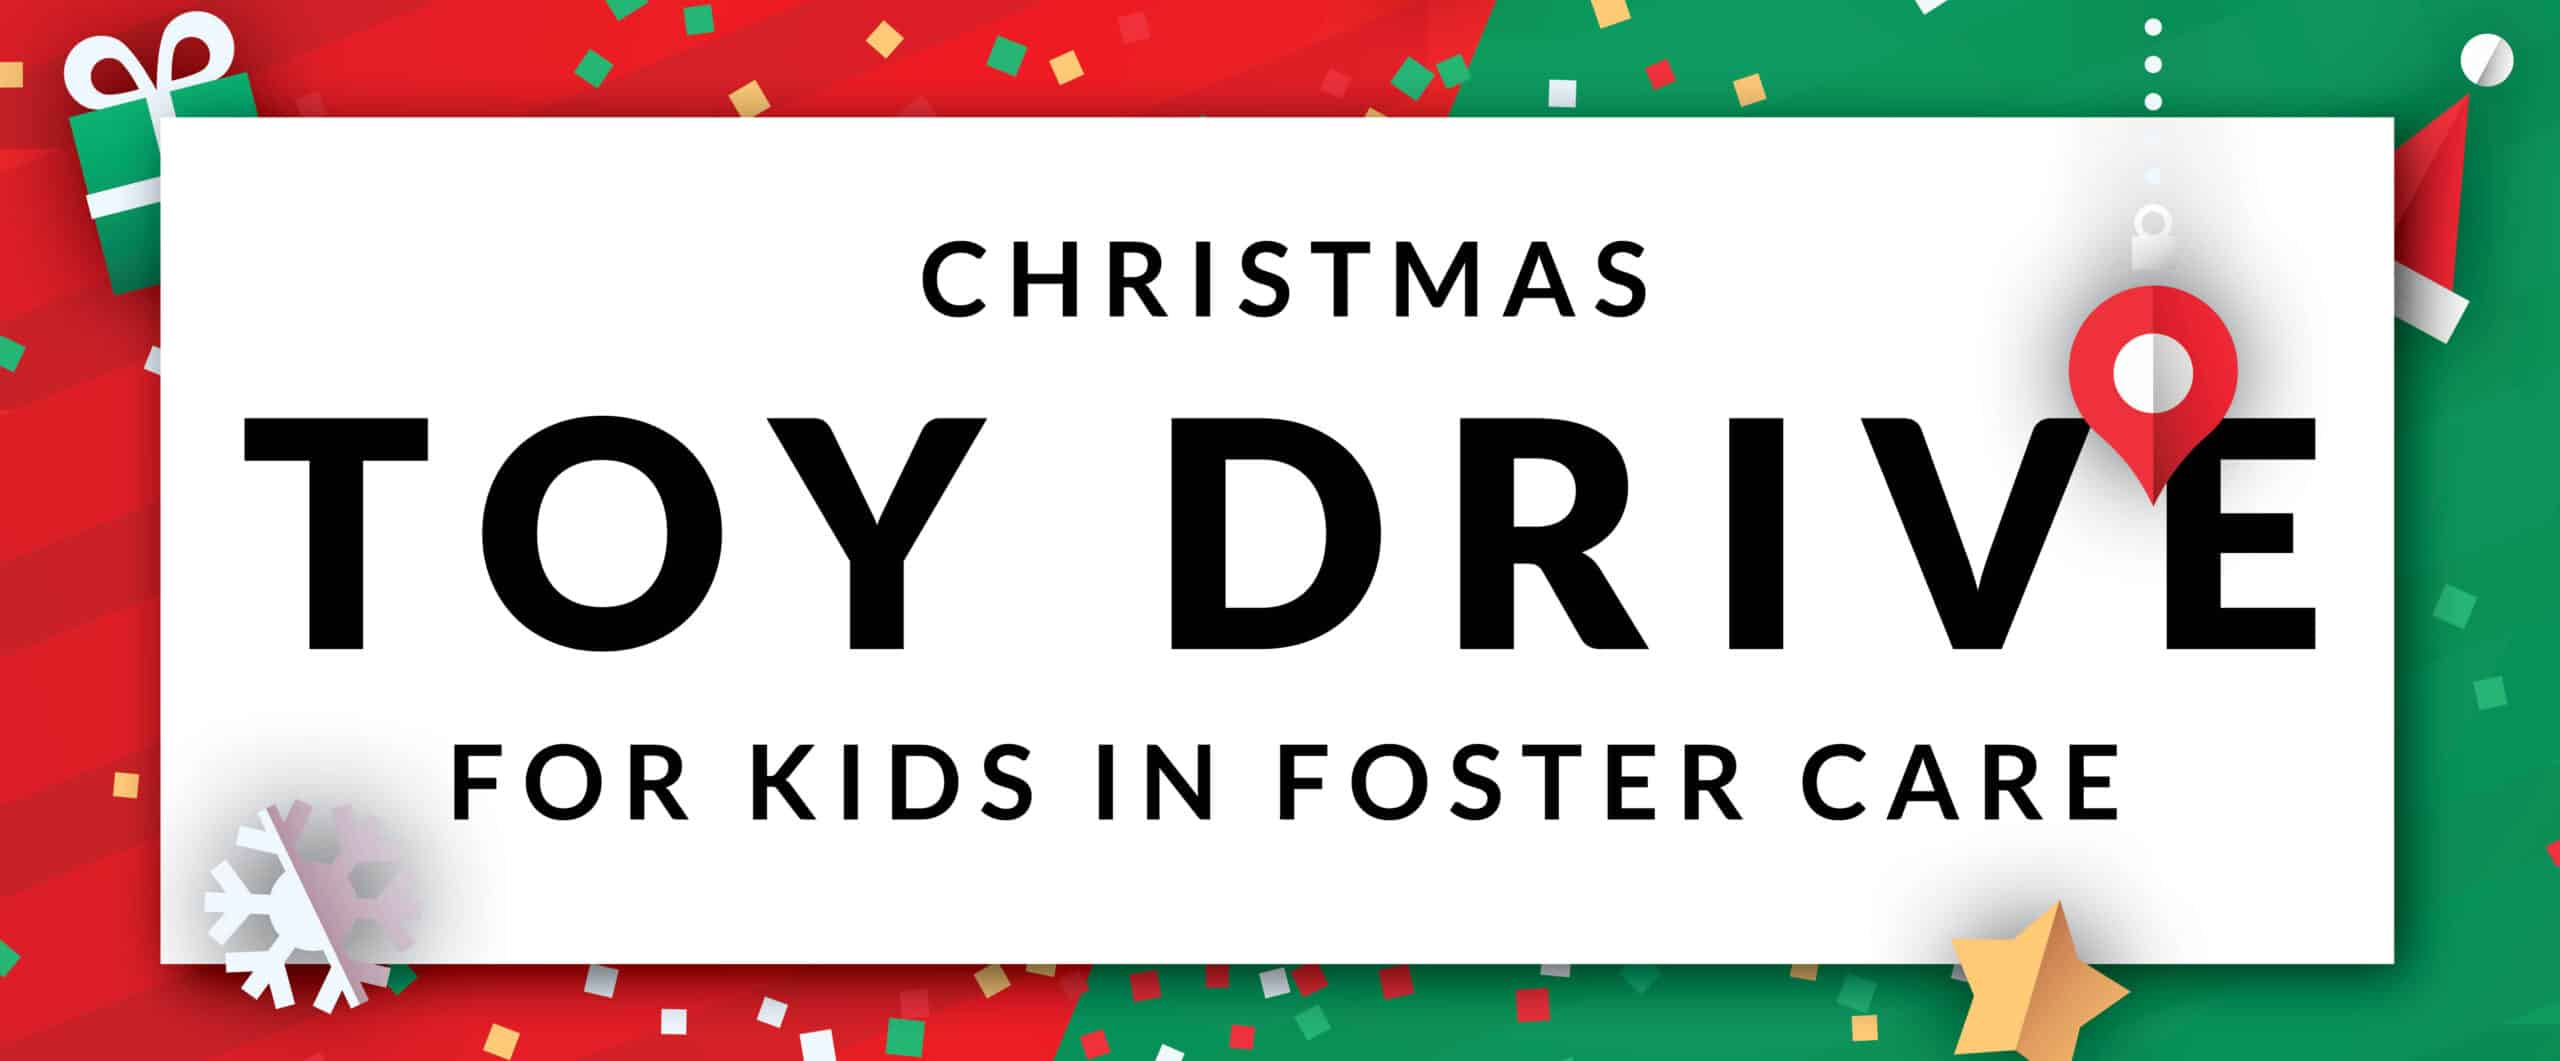 image that says Christmas Toy Drive for Kids in Foster Care